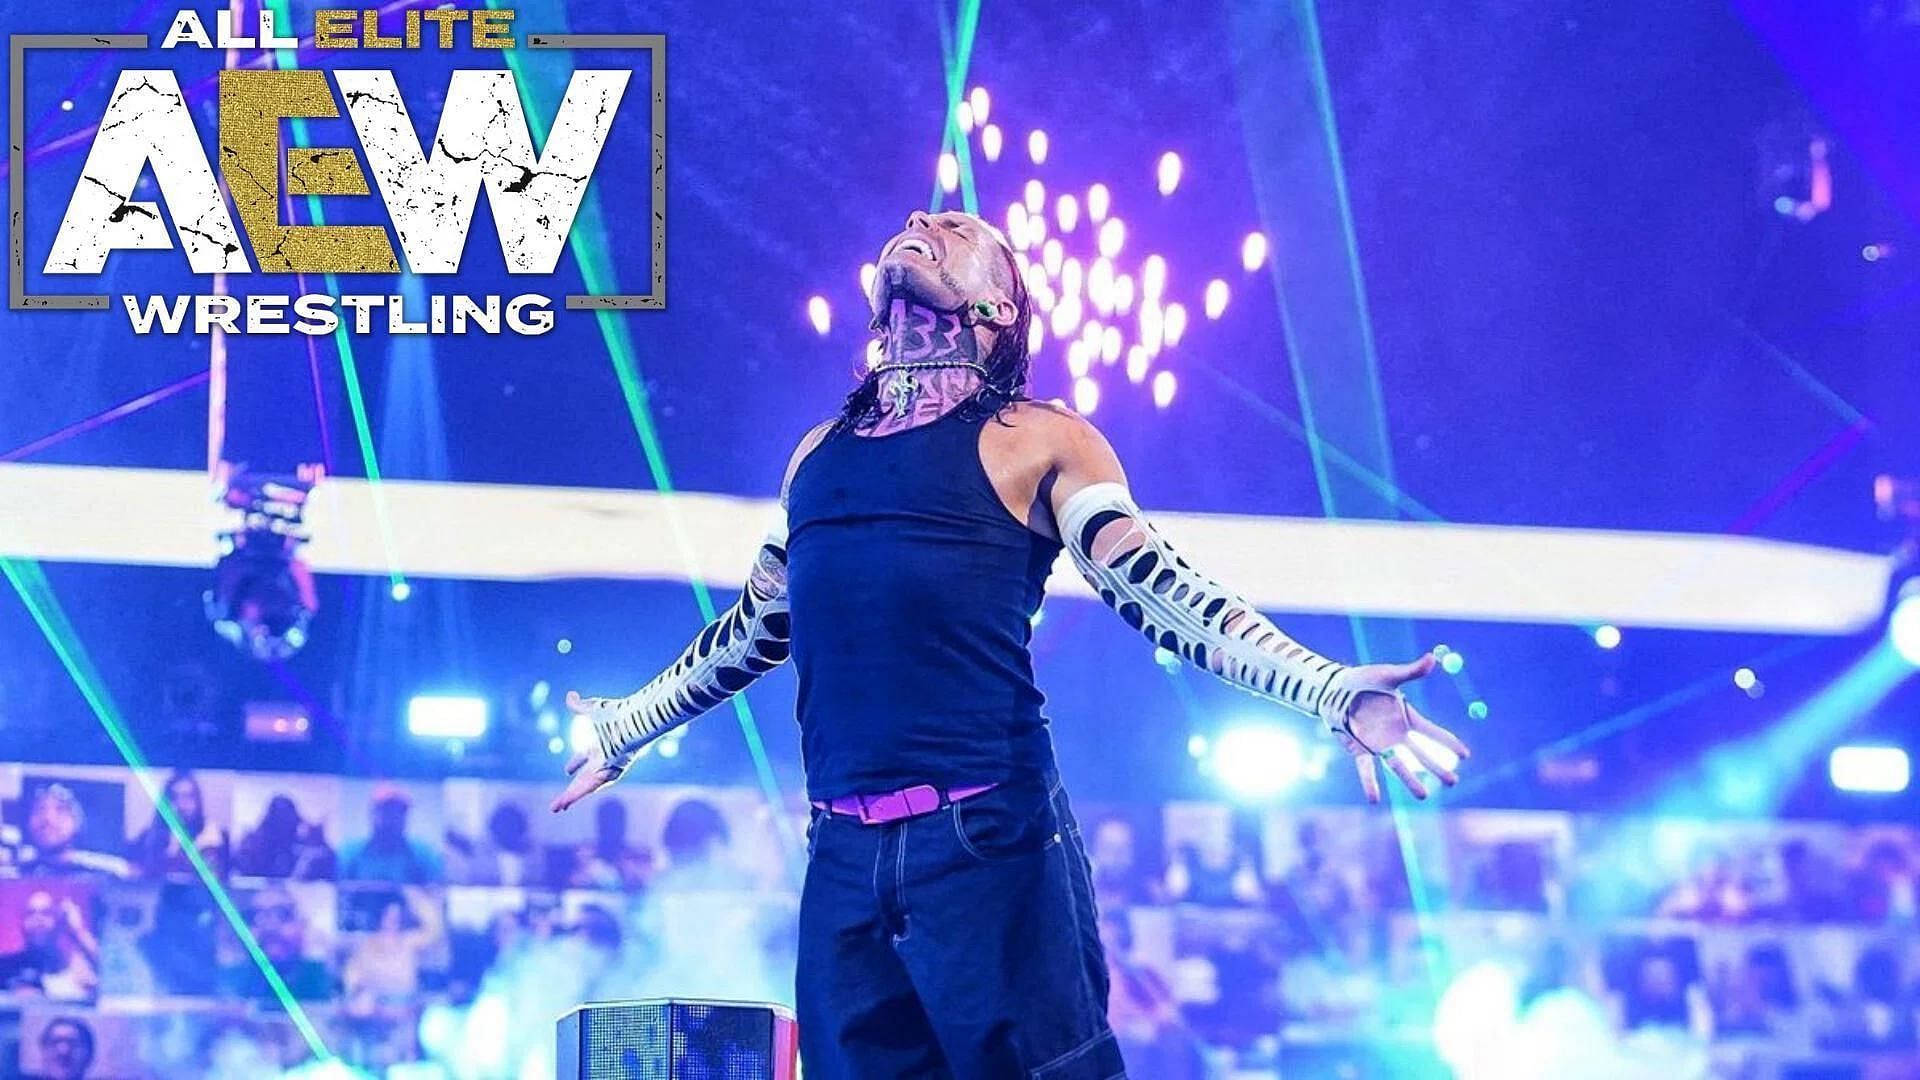 Jeff Hardy is still suspended from AEW